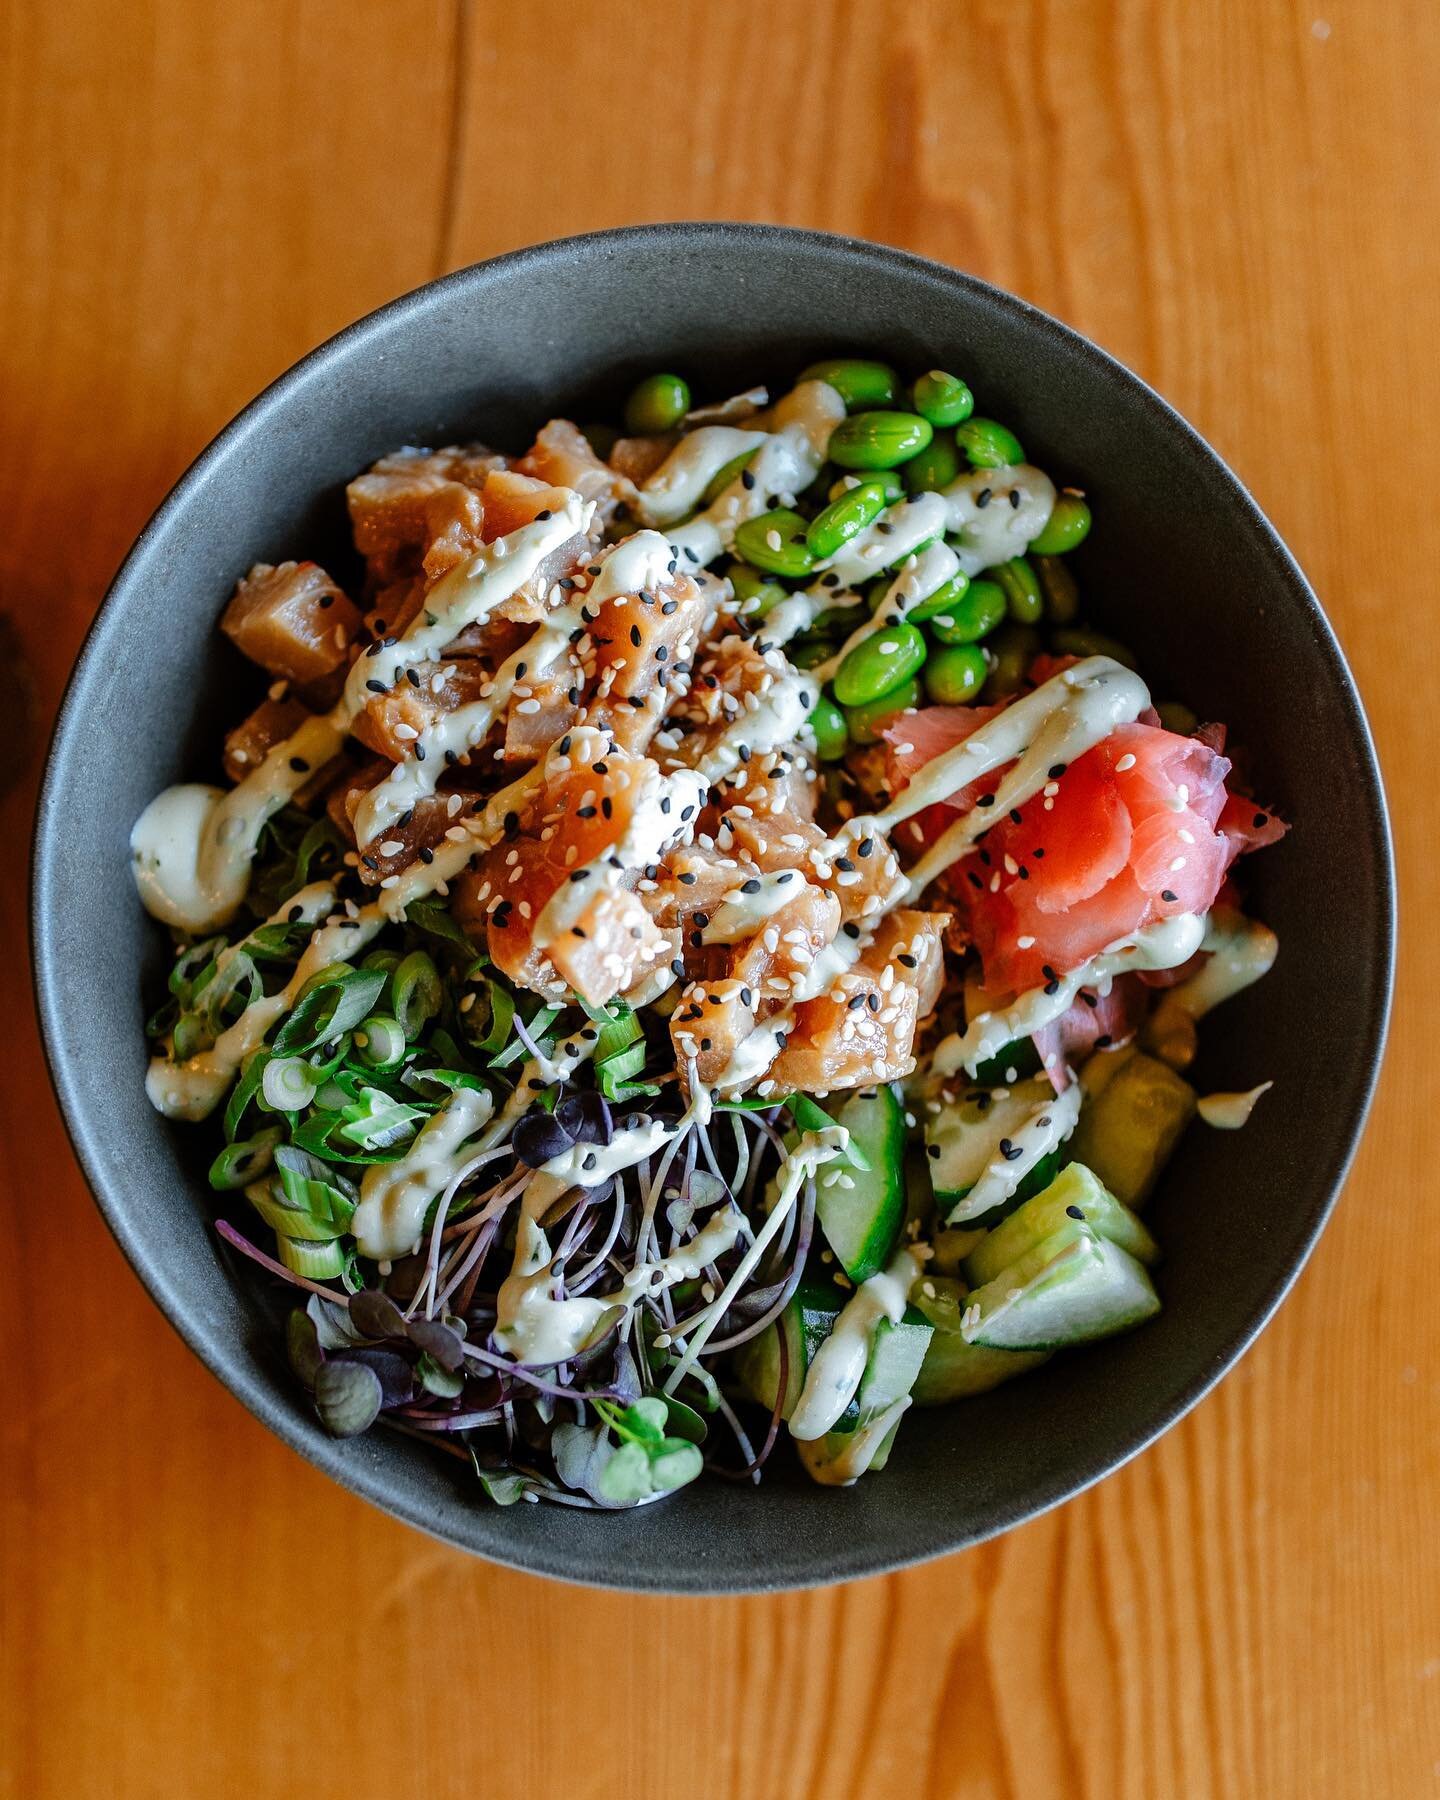 Attention all seafood lovers! We are thrilled to announce the return of our mouth-watering tuna poke bowl, back by popular demand!

This incredible dish features a perfect blend of fresh and flavorful ingredients that are sure to tantalize your taste